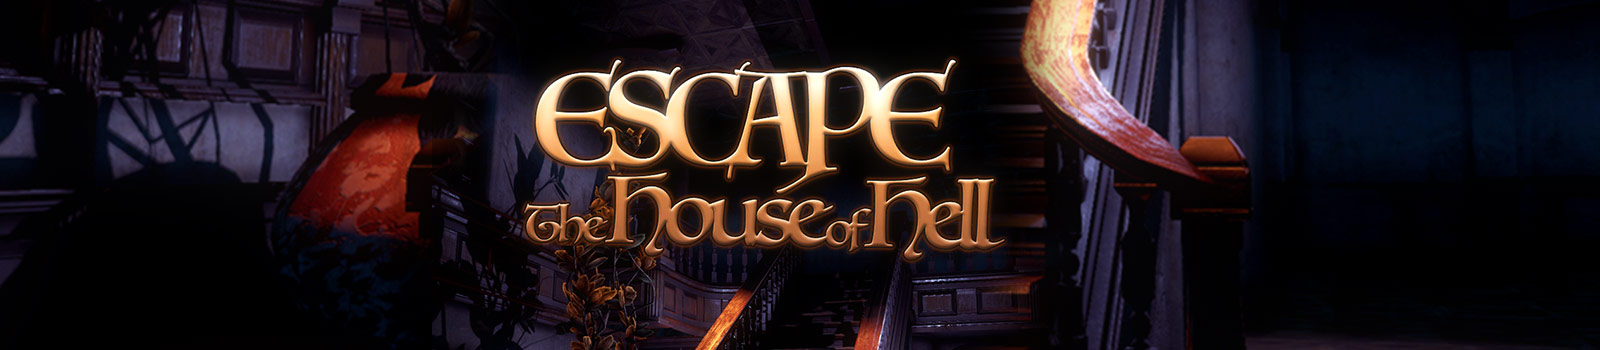 Escape the House of Hell